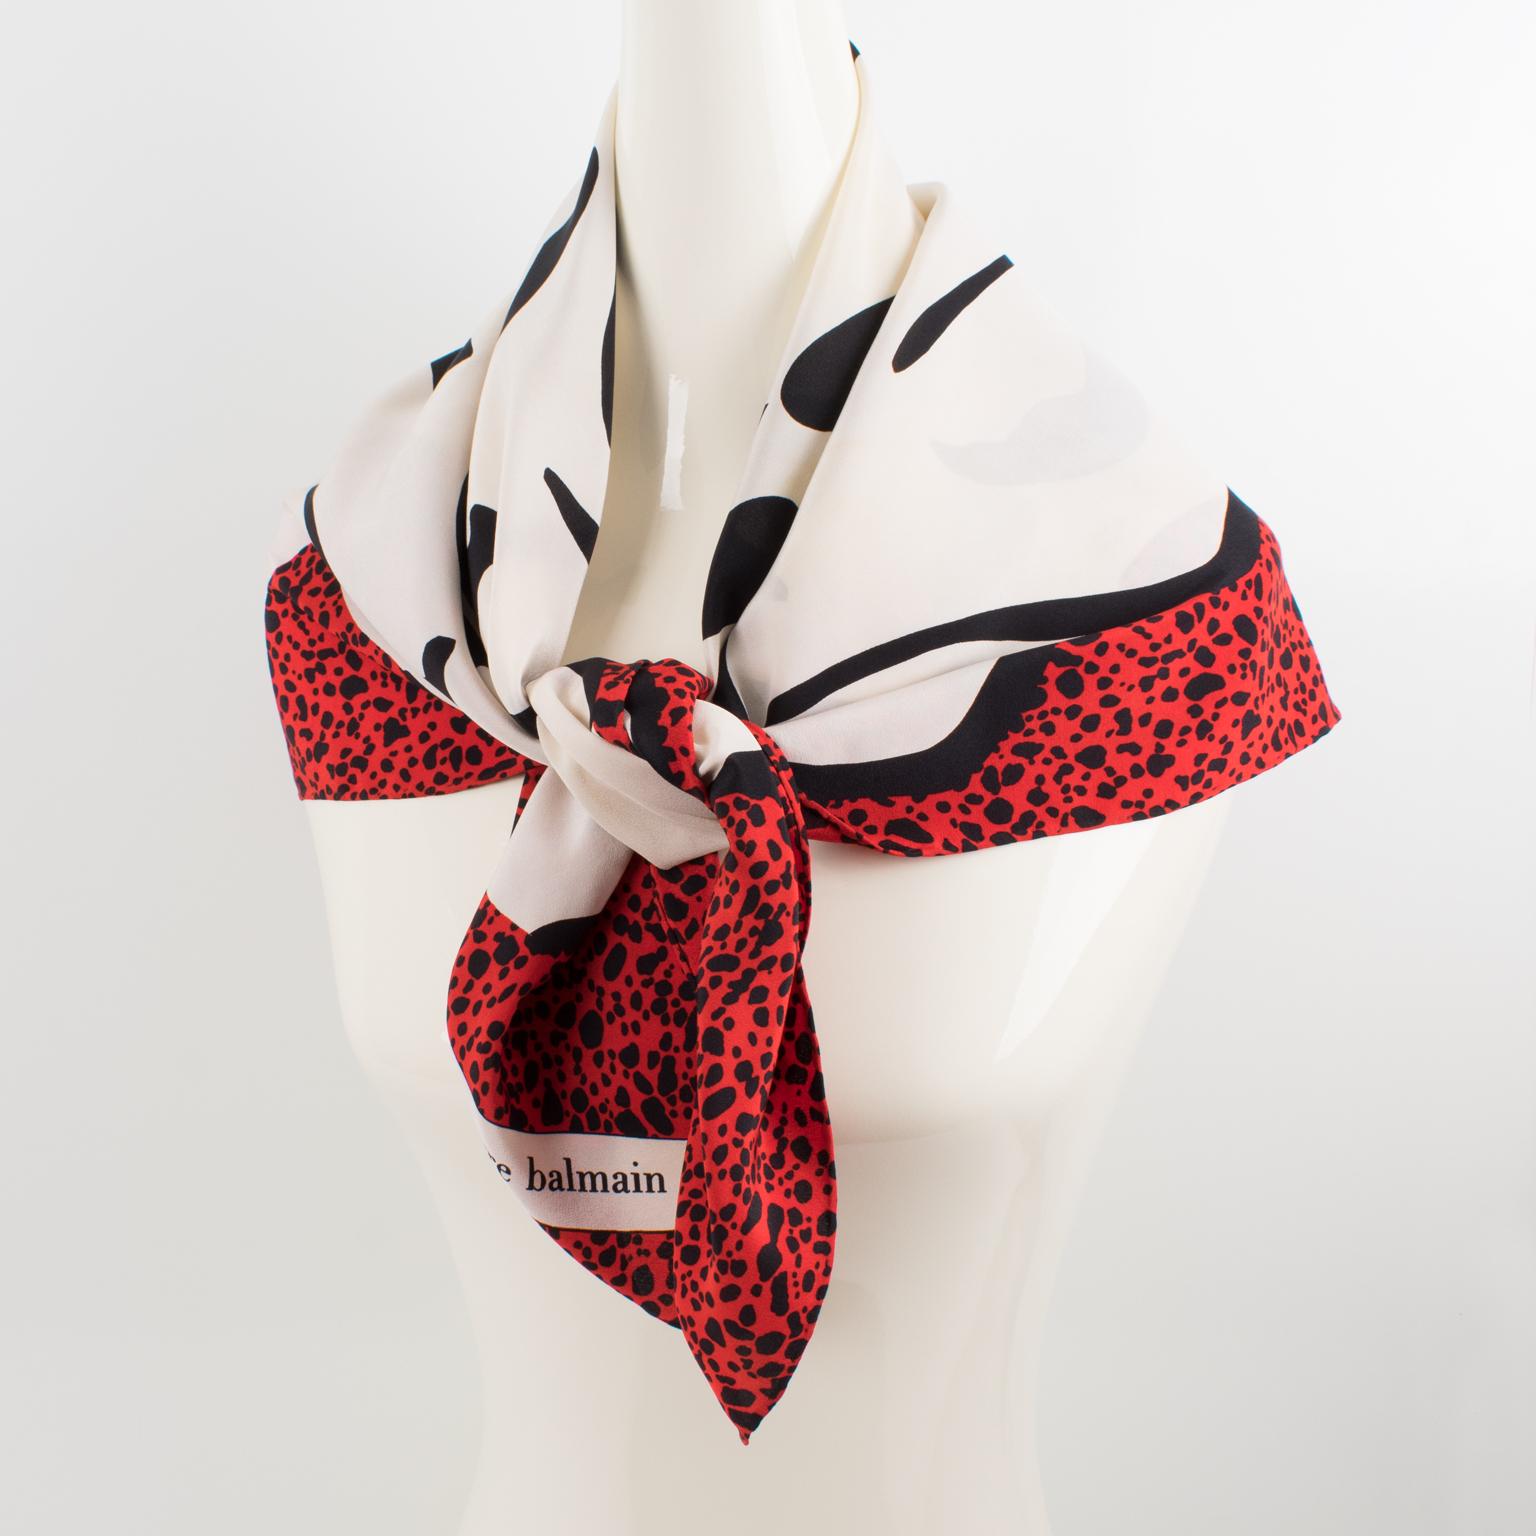 Stylish silk scarf by Pierre Balmain Paris. With a 1970s typical print, this vintage silk scarf features an oversized rose flower in an assorted combination of red and black on an ivory-white background. Signed Pierre Balmain Paris in the bottom